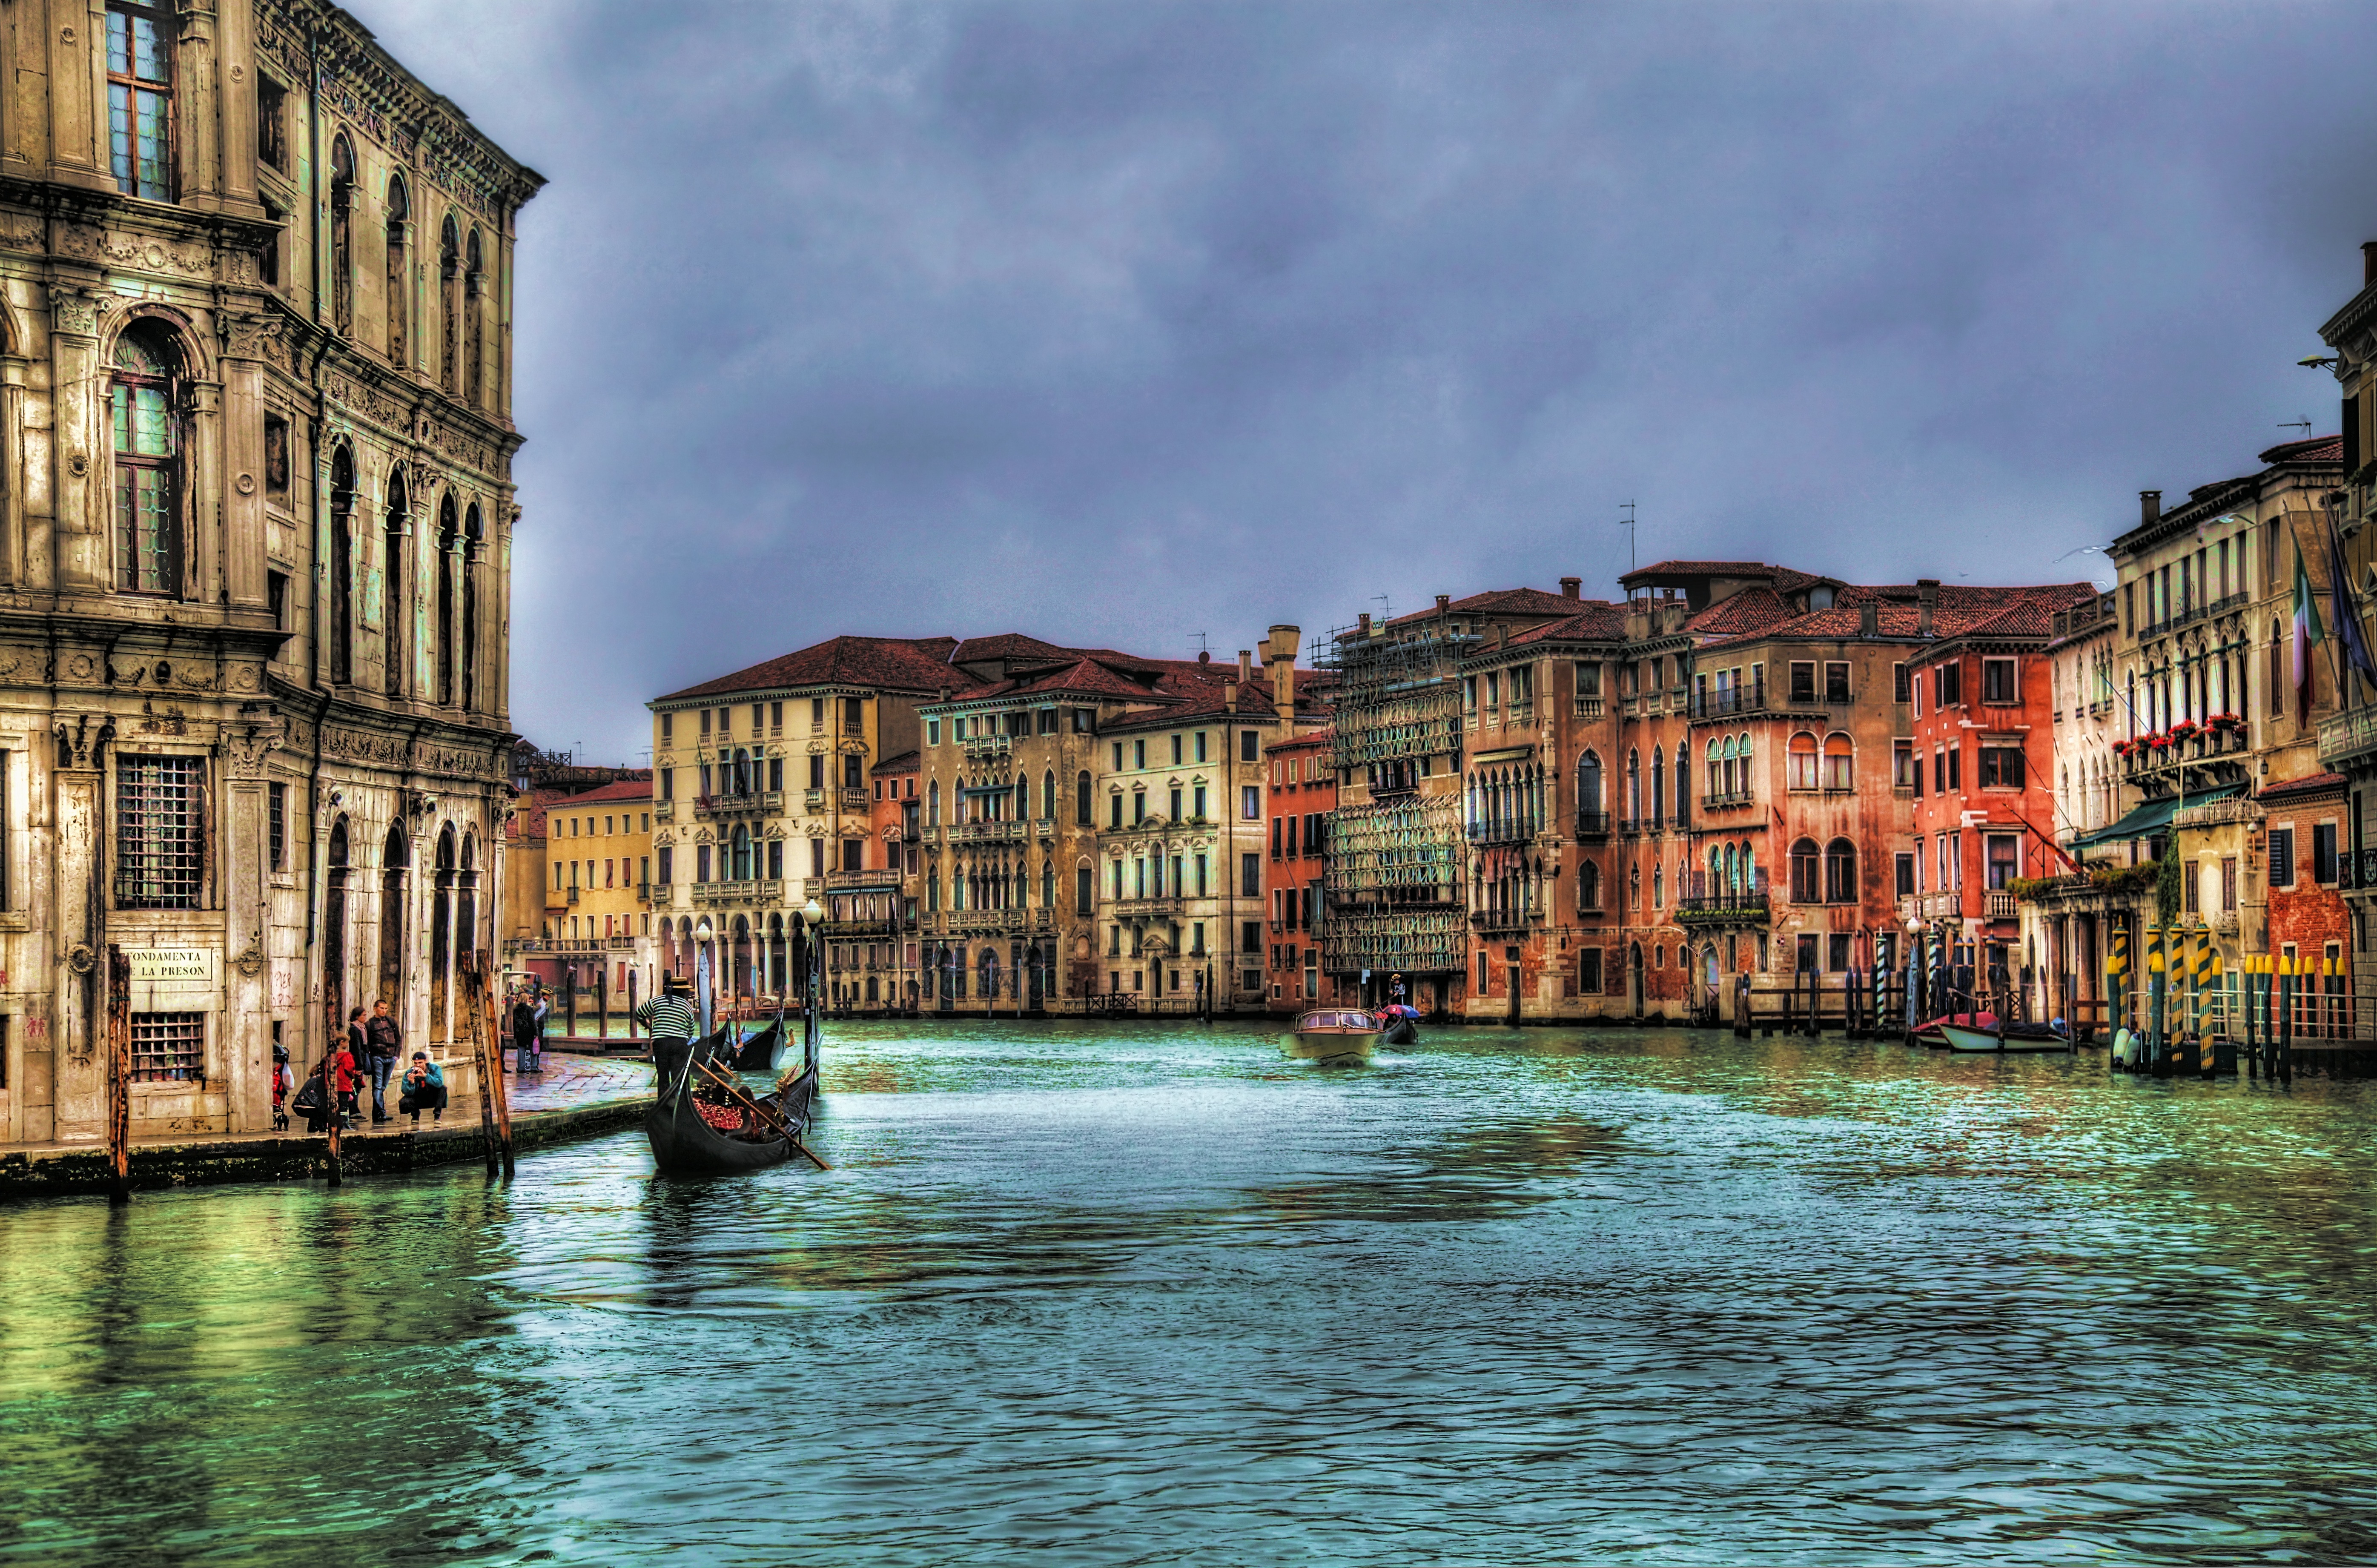 colorful, man made, venice, boat, grand canal, house, italy, cities